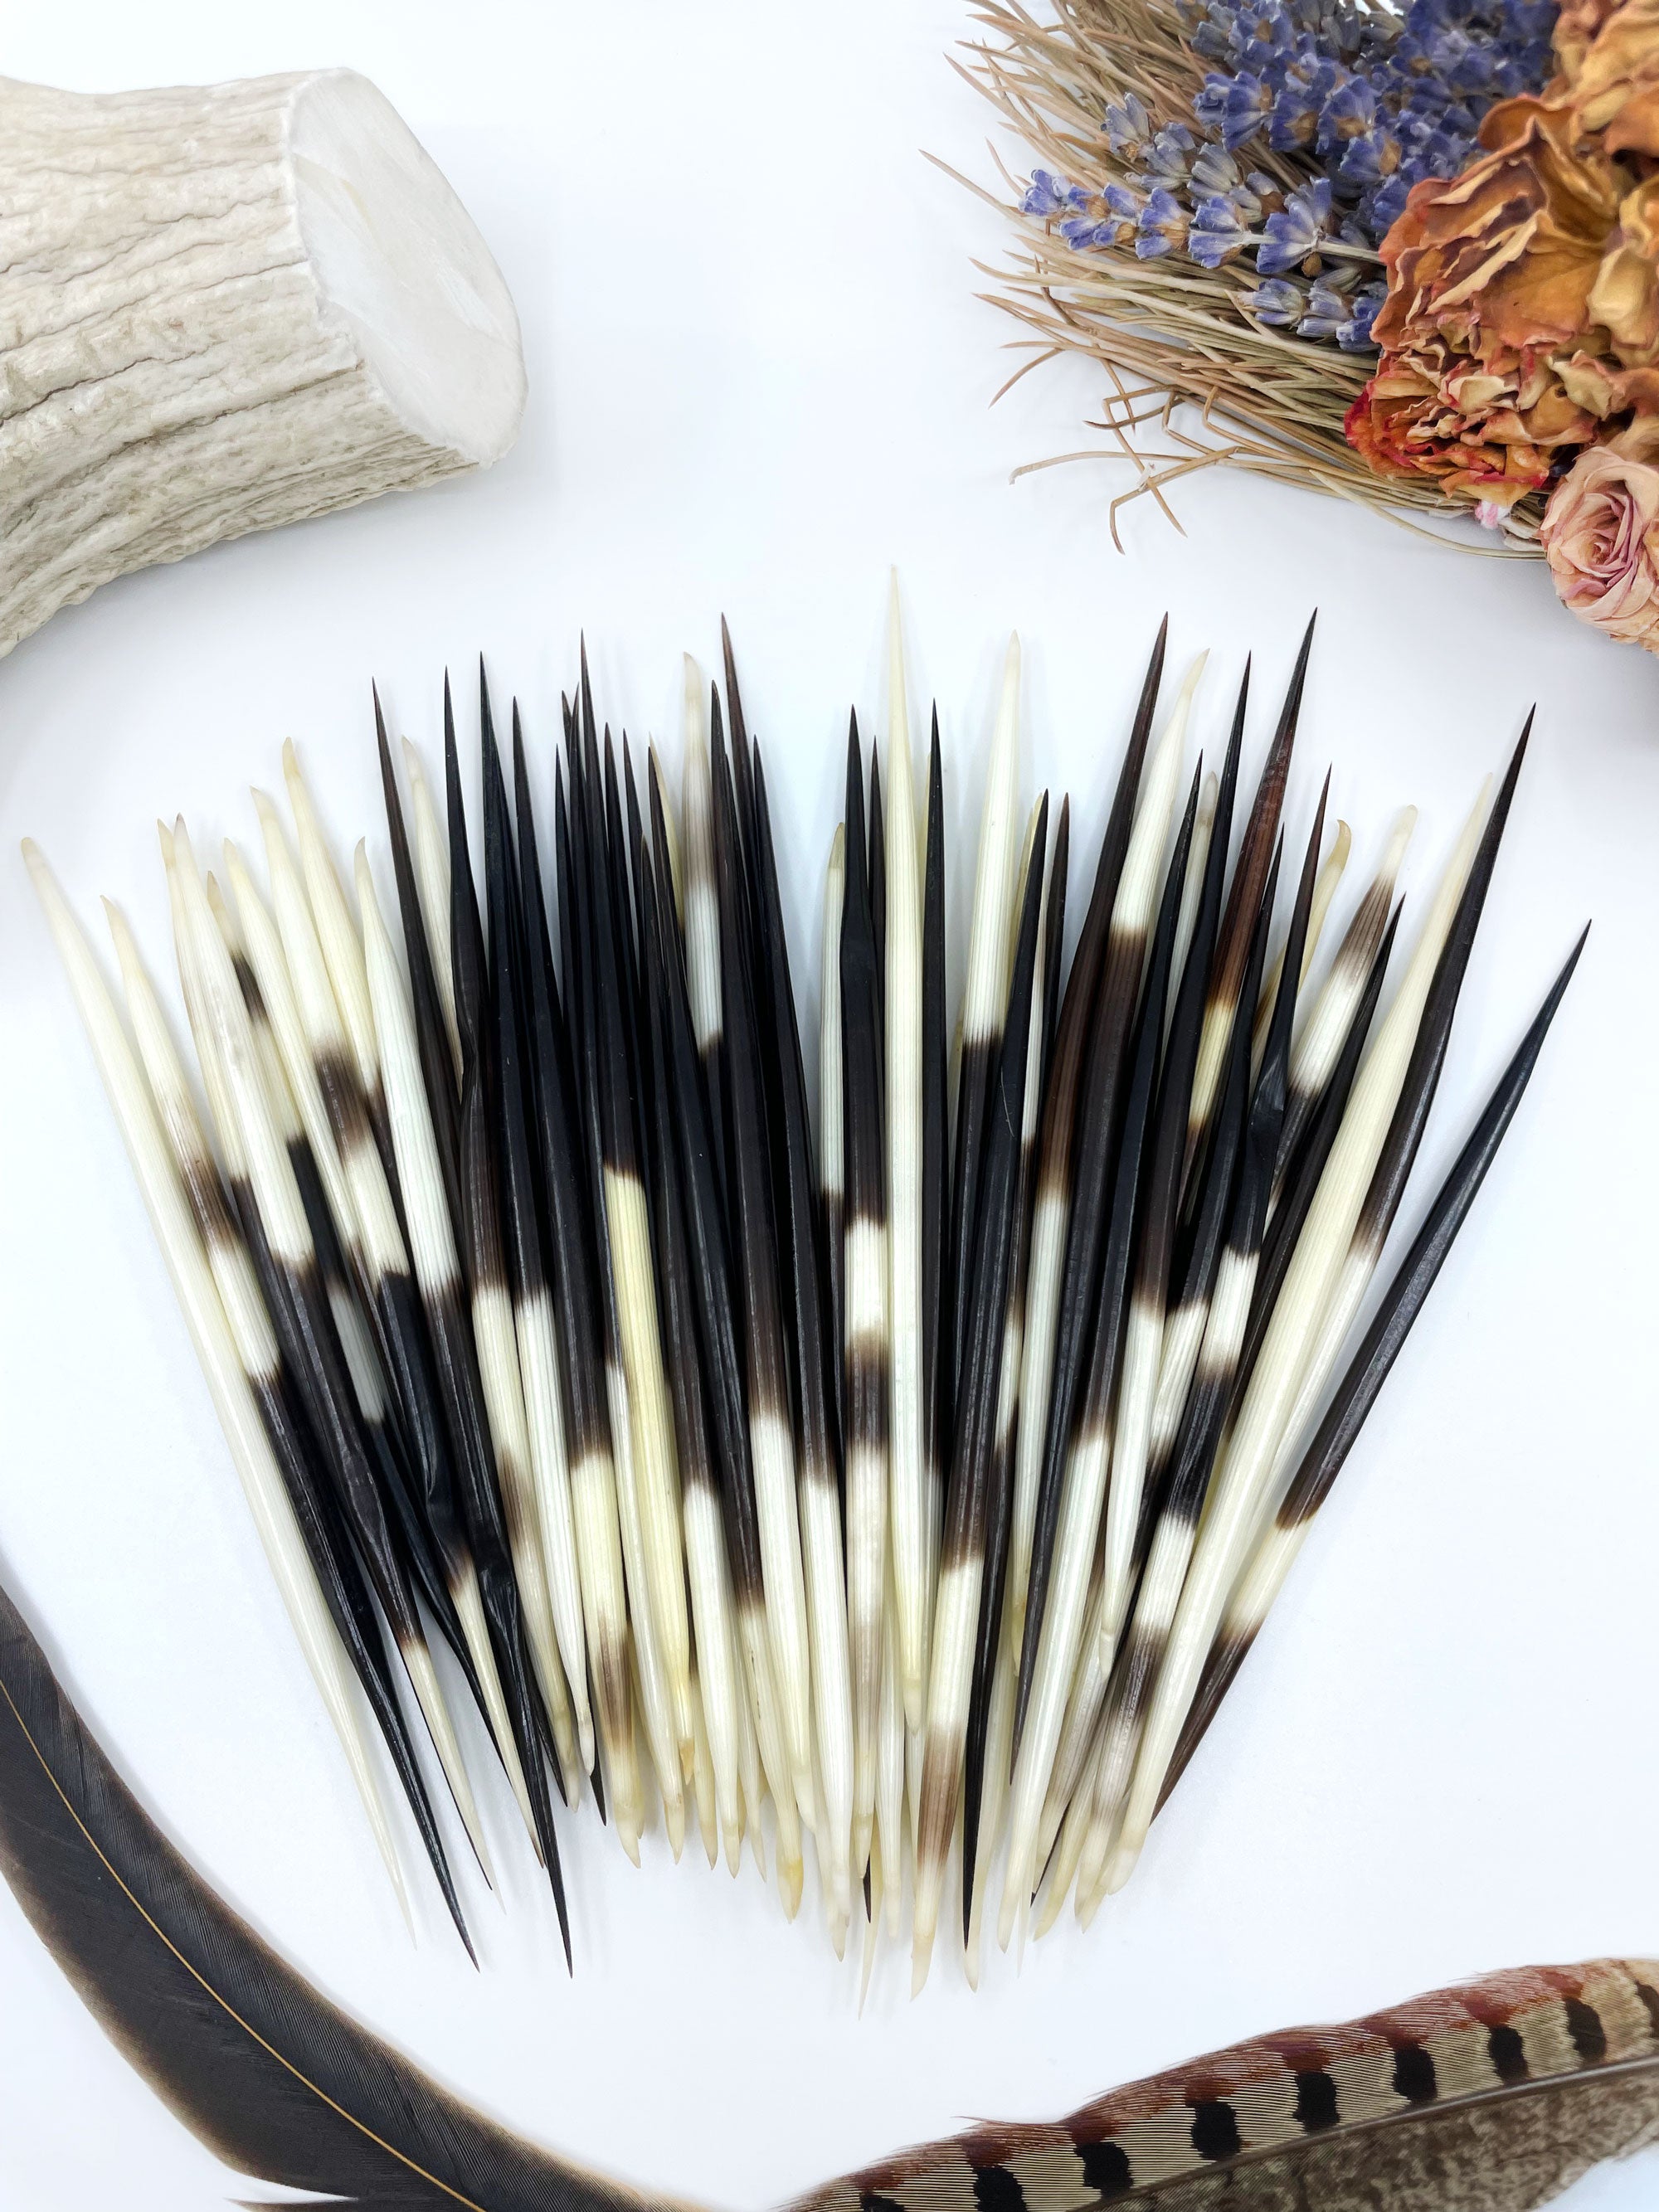 Authentic African Porcupine Quills, 4-5 long, 5 Small pcs